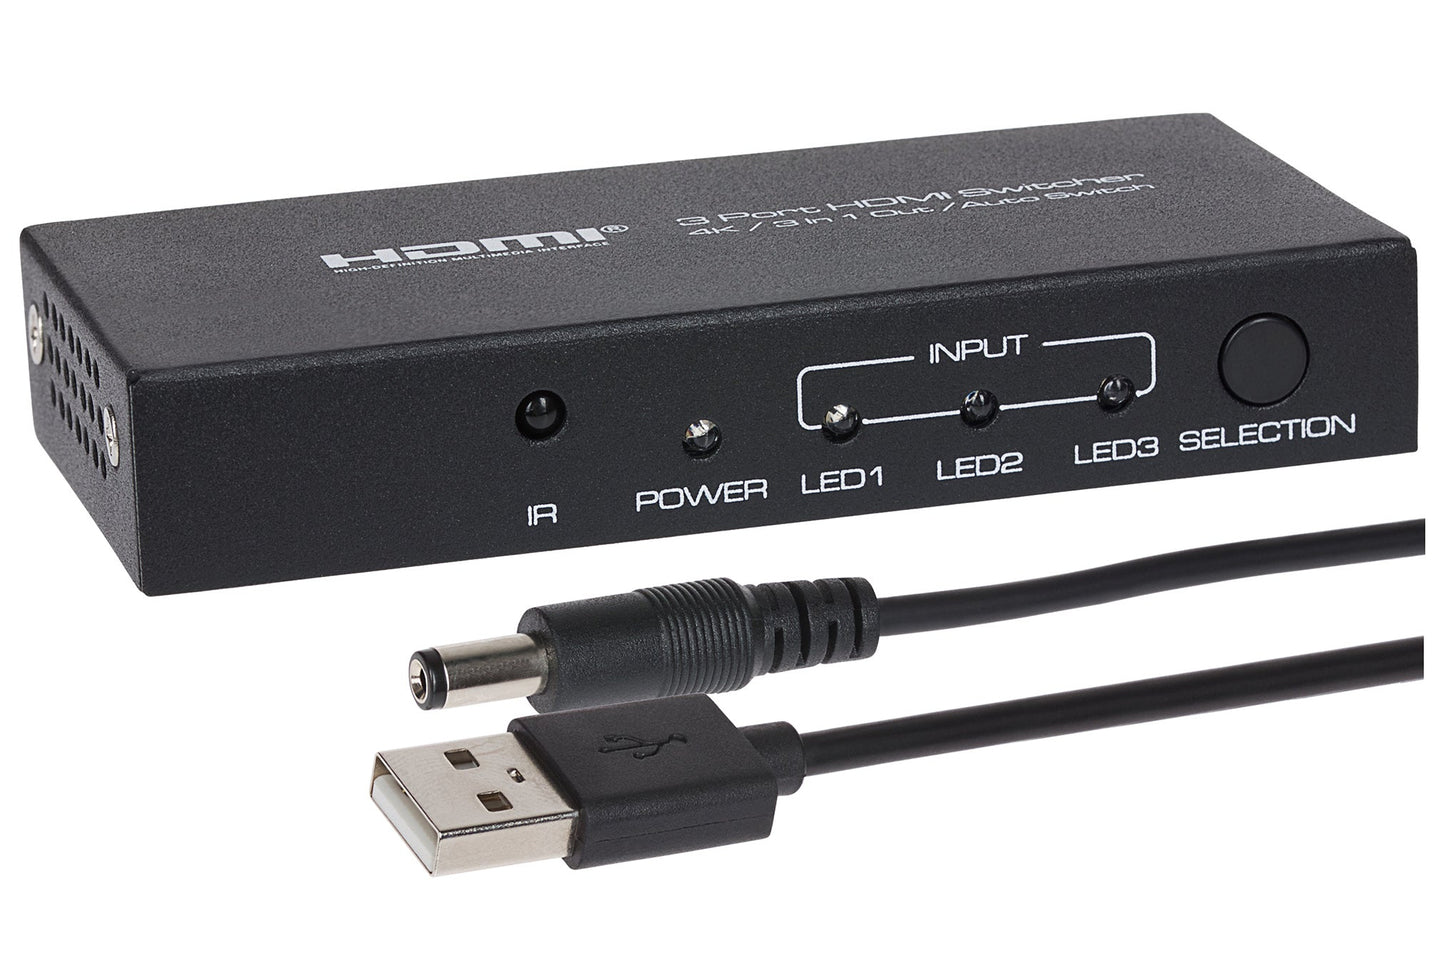 MPS HDMI Switch 3 Port In 1 Port Out 4K 30Hz Resolution with Remote Control - Black - maplin.co.uk